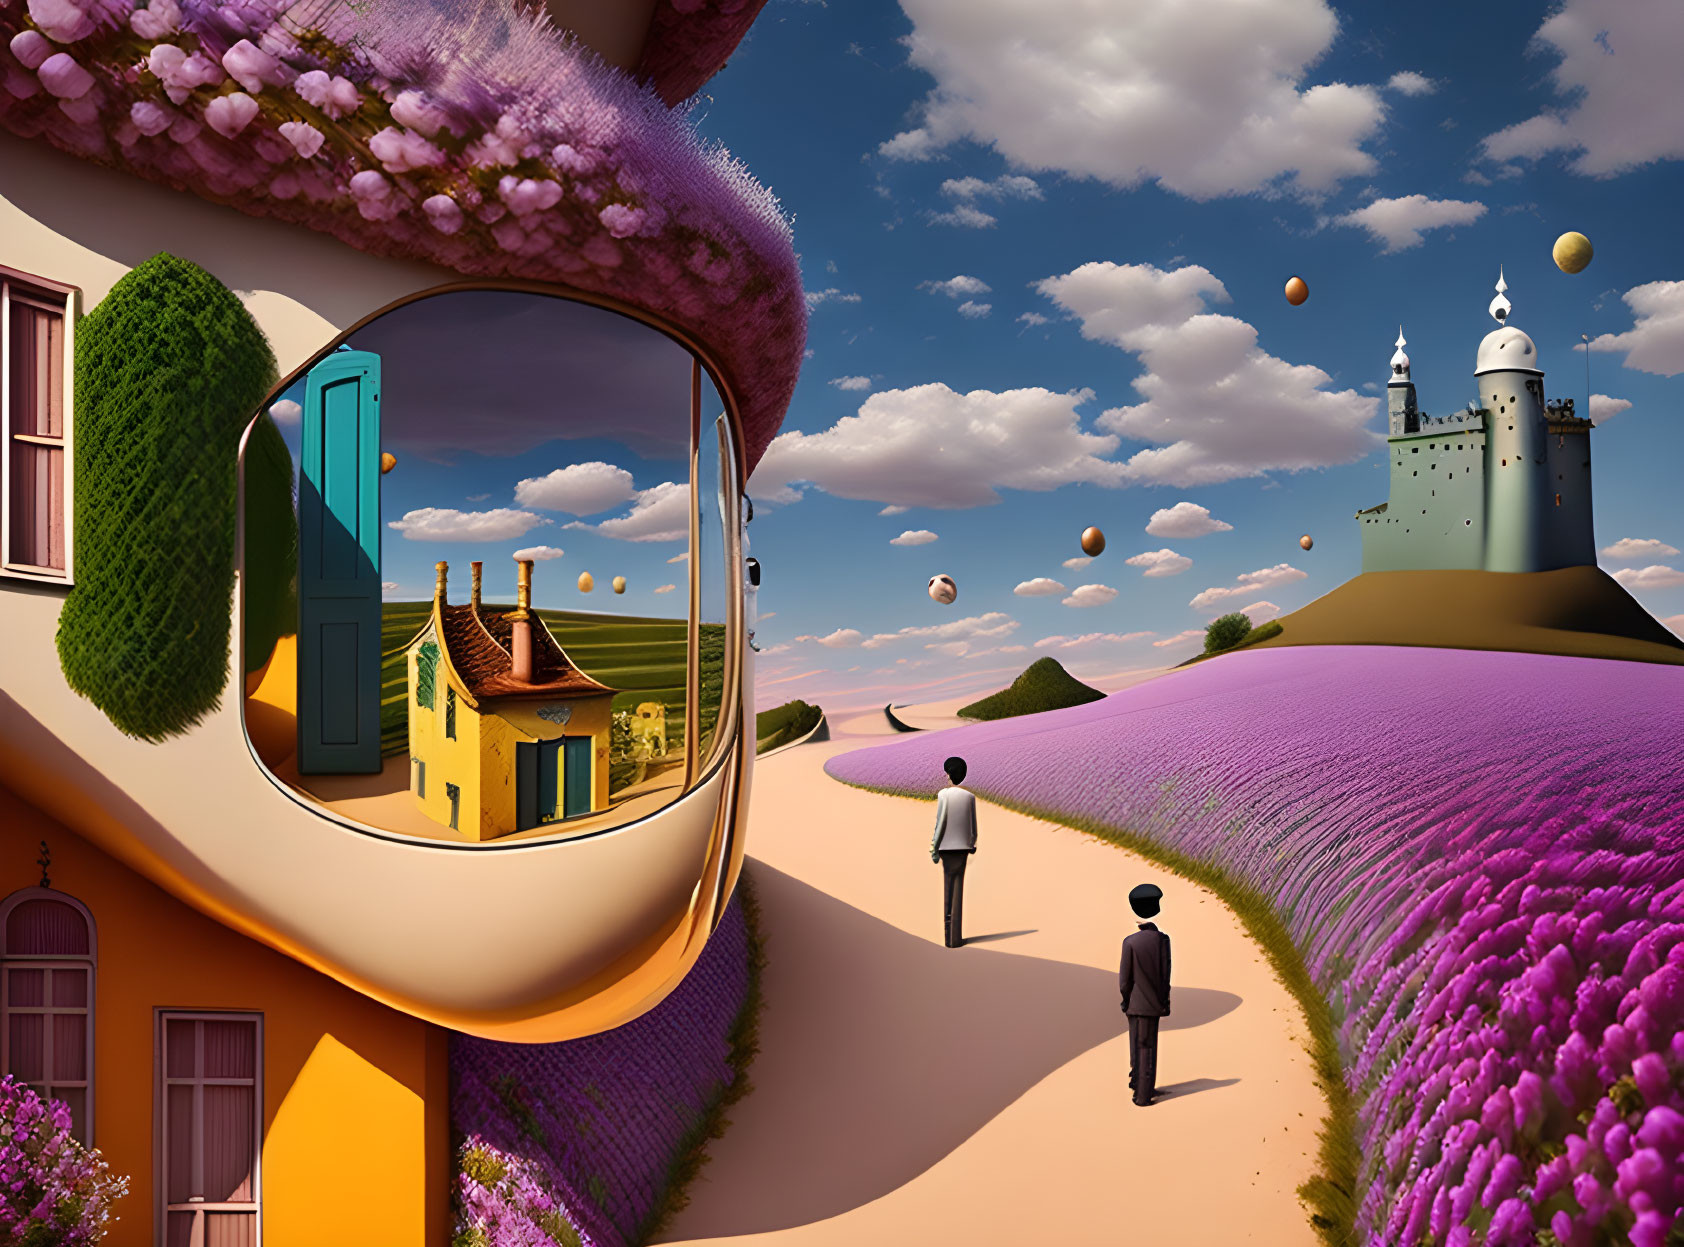 Surreal landscape featuring giant eyeglass frame, reflective house, man on lavender path, and